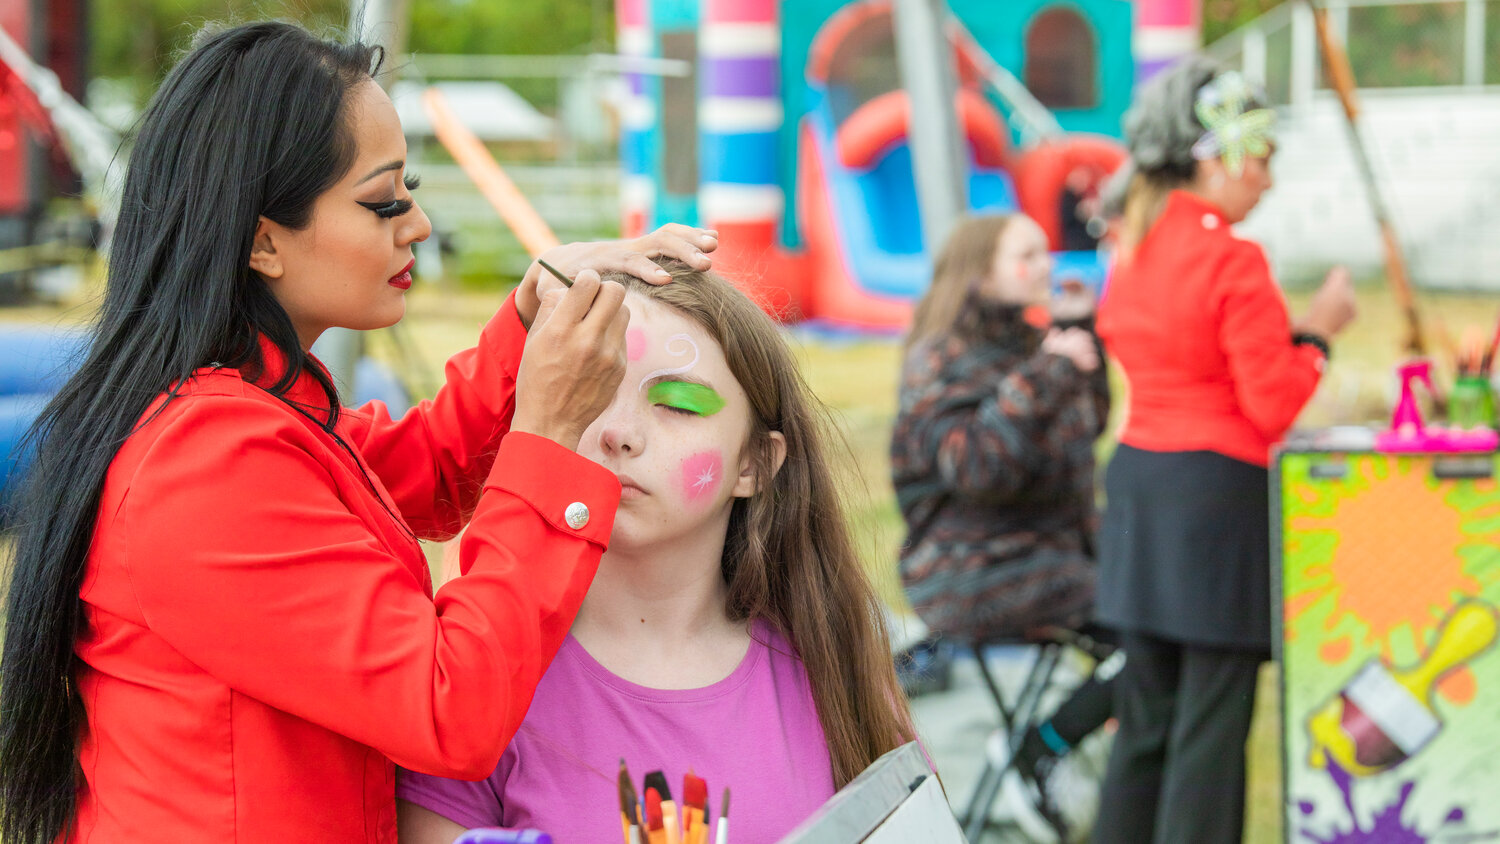 Attendees have their faces painted at the Southwest Washington Fairgrounds during the Jordan World Circus show on Wednesday, May 31.